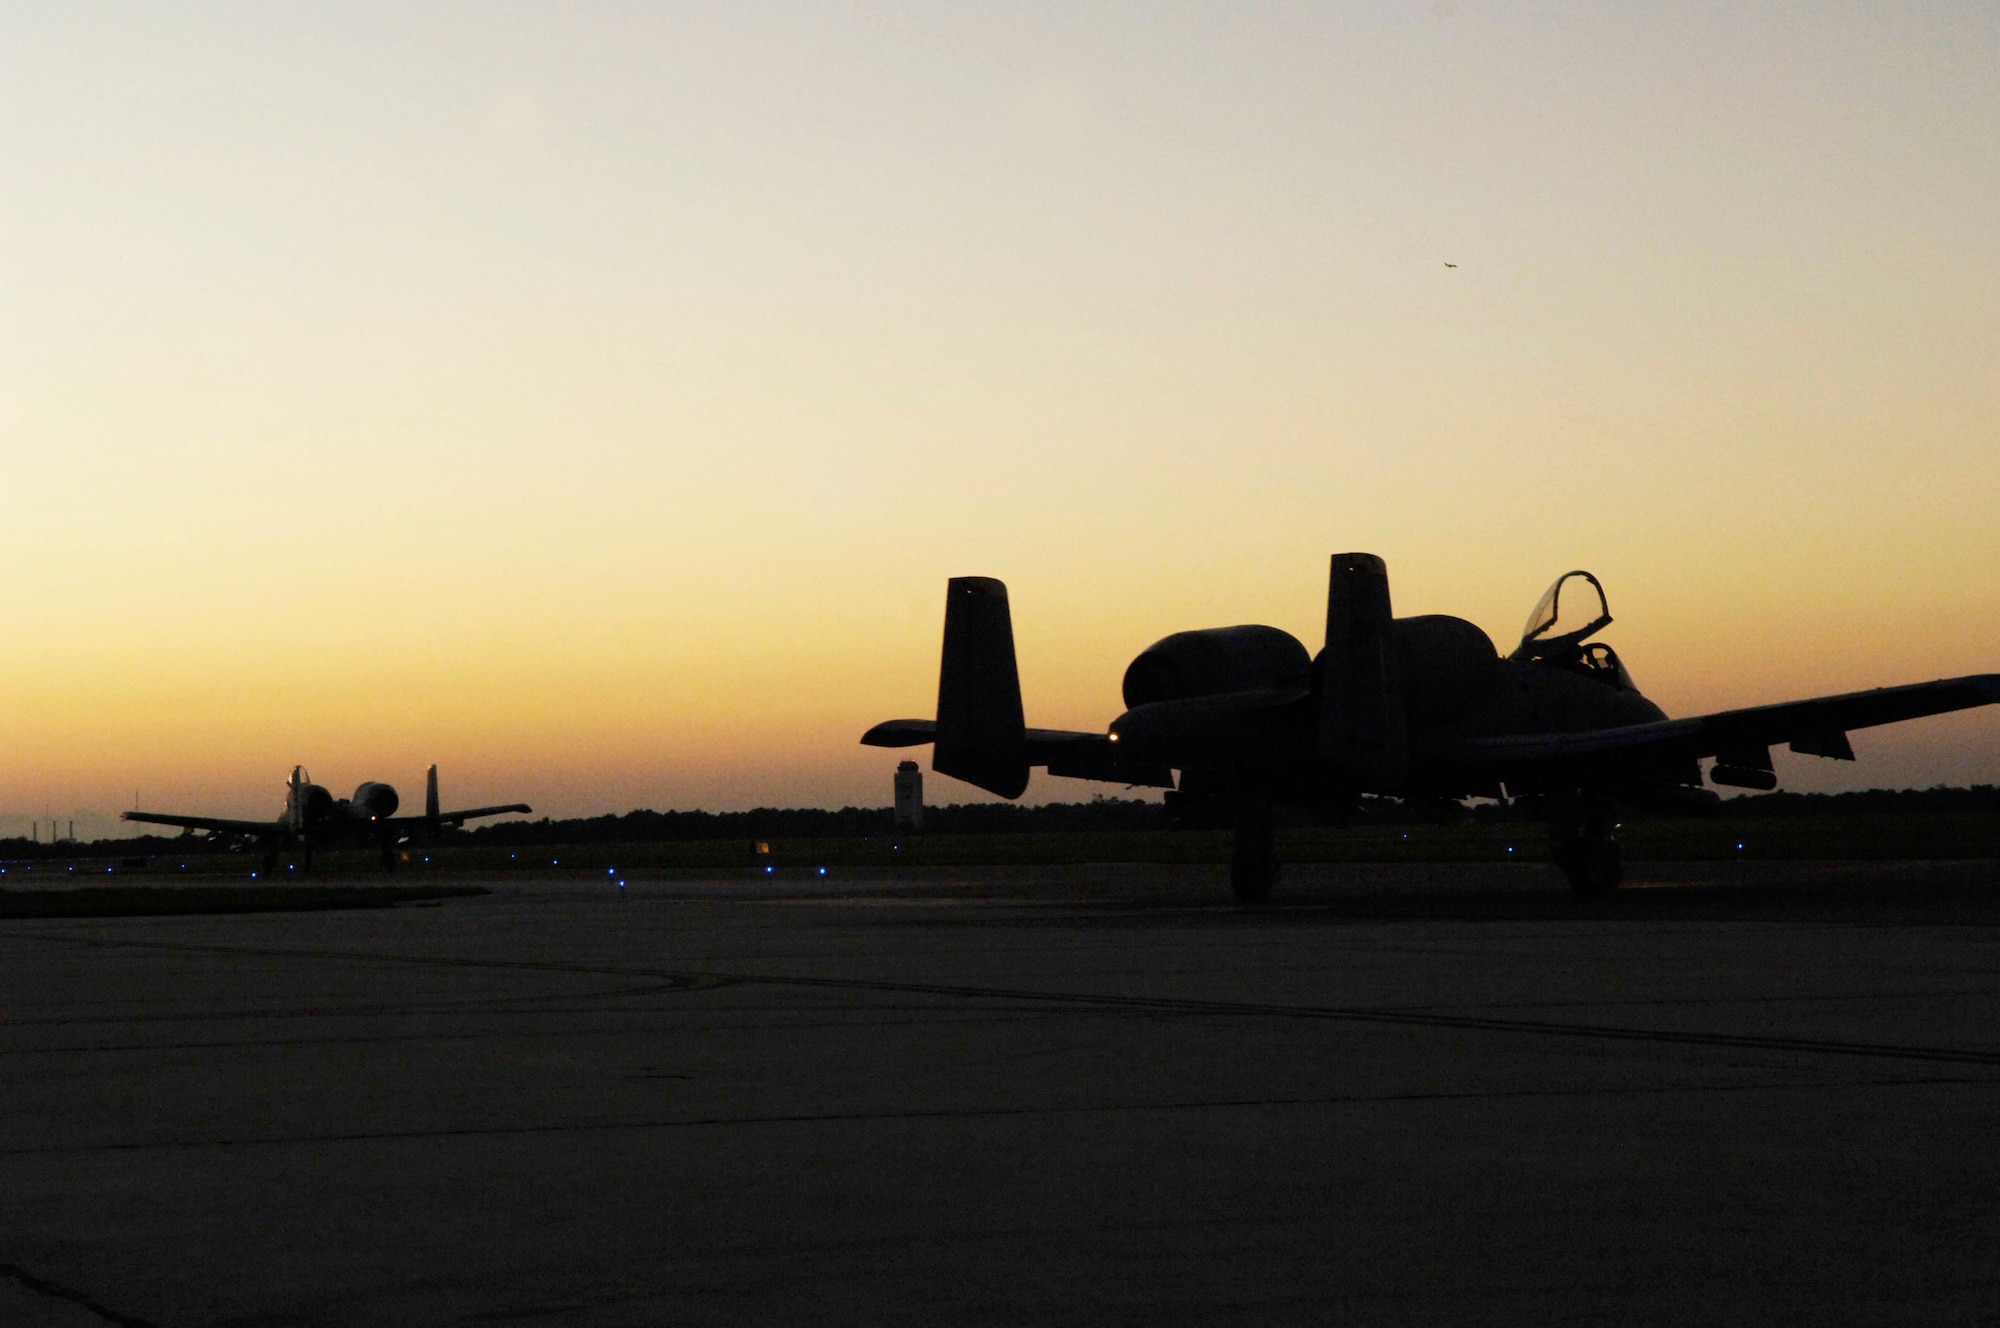 A-10s from Spangdahlem Air Base depart MacDill AFB for Avon Park Fla. in support of exercise Atlantic Strike VI; a U.S. Central Command Air Forces exercise focused on Joint Terminal Attack Controllers and urban close air support operations. (U.S. Air Force By Photo Airman 1st Class Stephenie Wade)